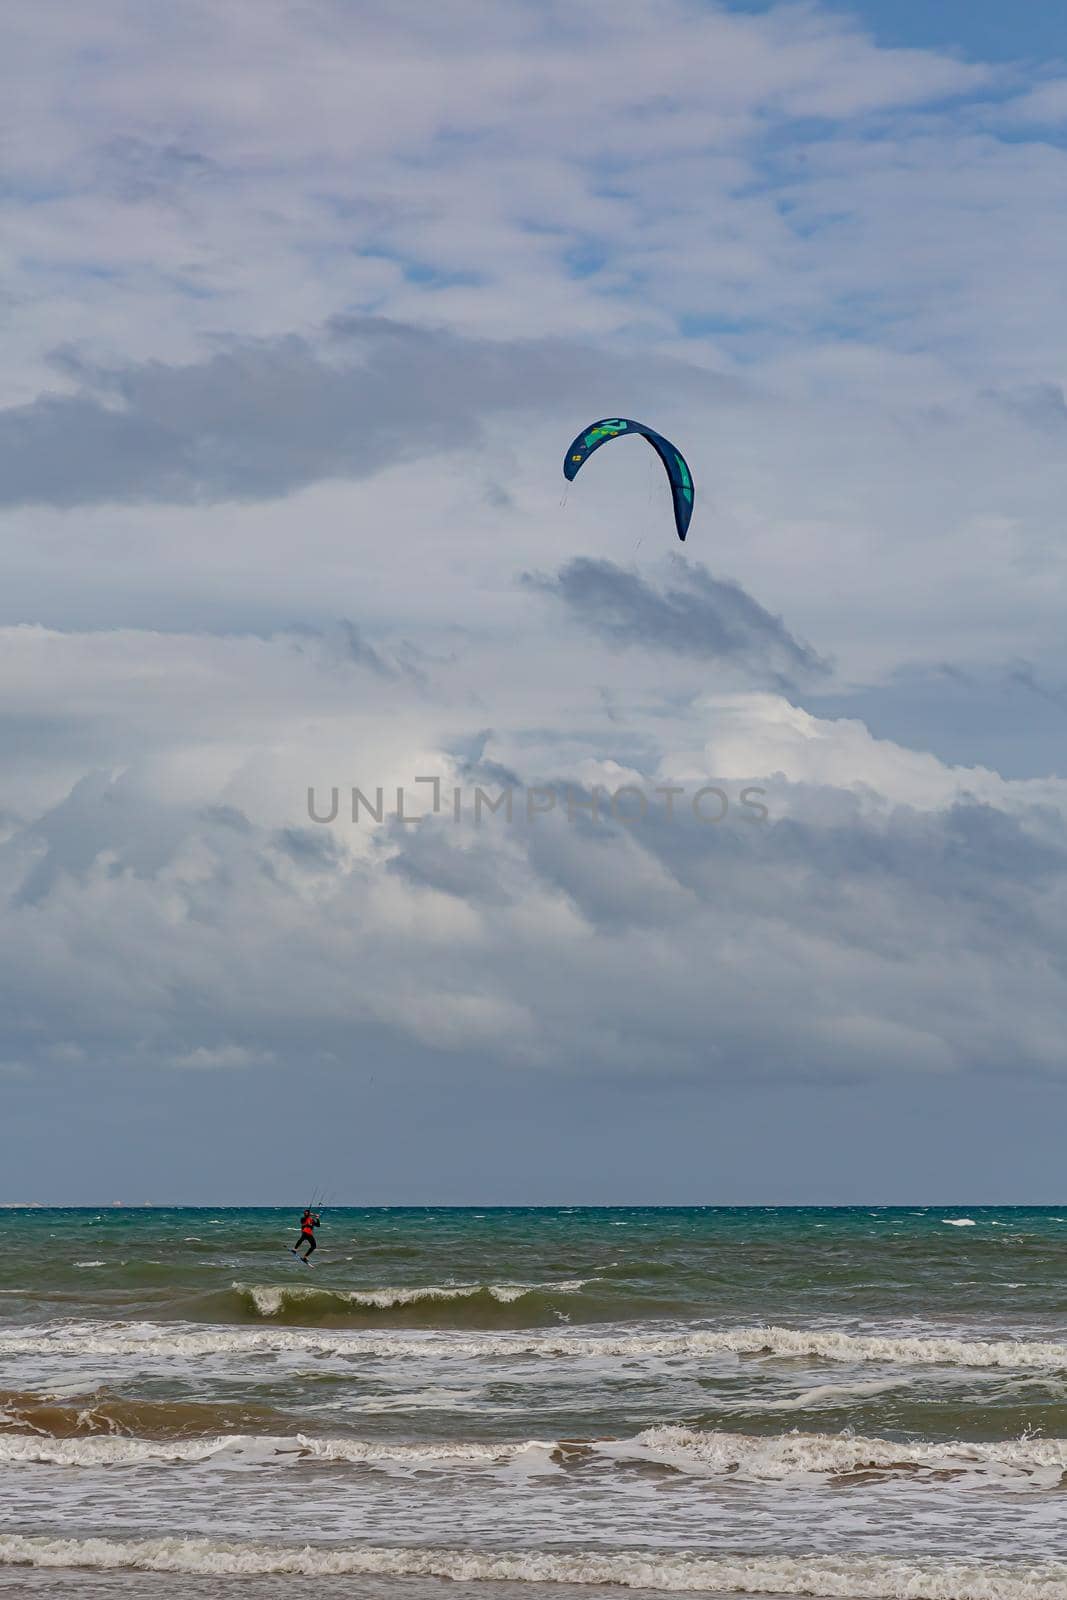 Professional kiter makes the difficult trick on a beautiful background. Kitesurfing Kiteboarding action photos man among waves quickly goes by Milanchikov